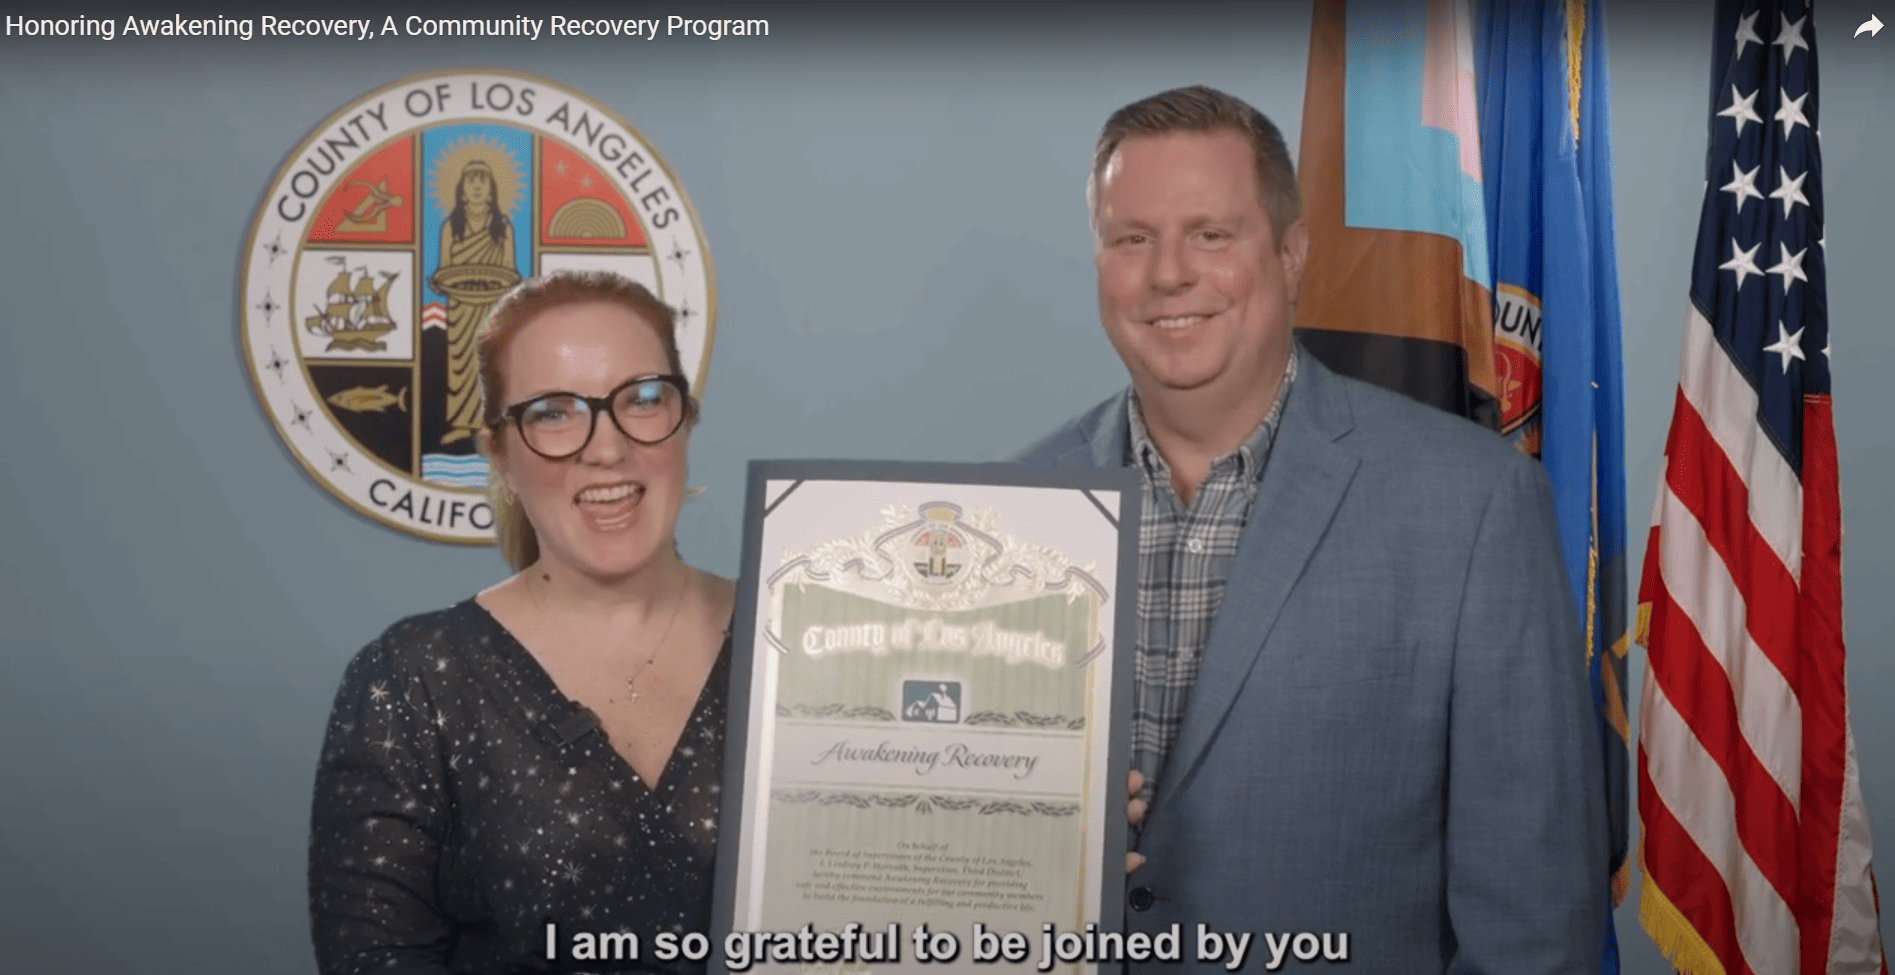 You are currently viewing L.A. County Supervisor Lindsey Horvath Honors Awakening Recovery at Board of Supervisors Meeting